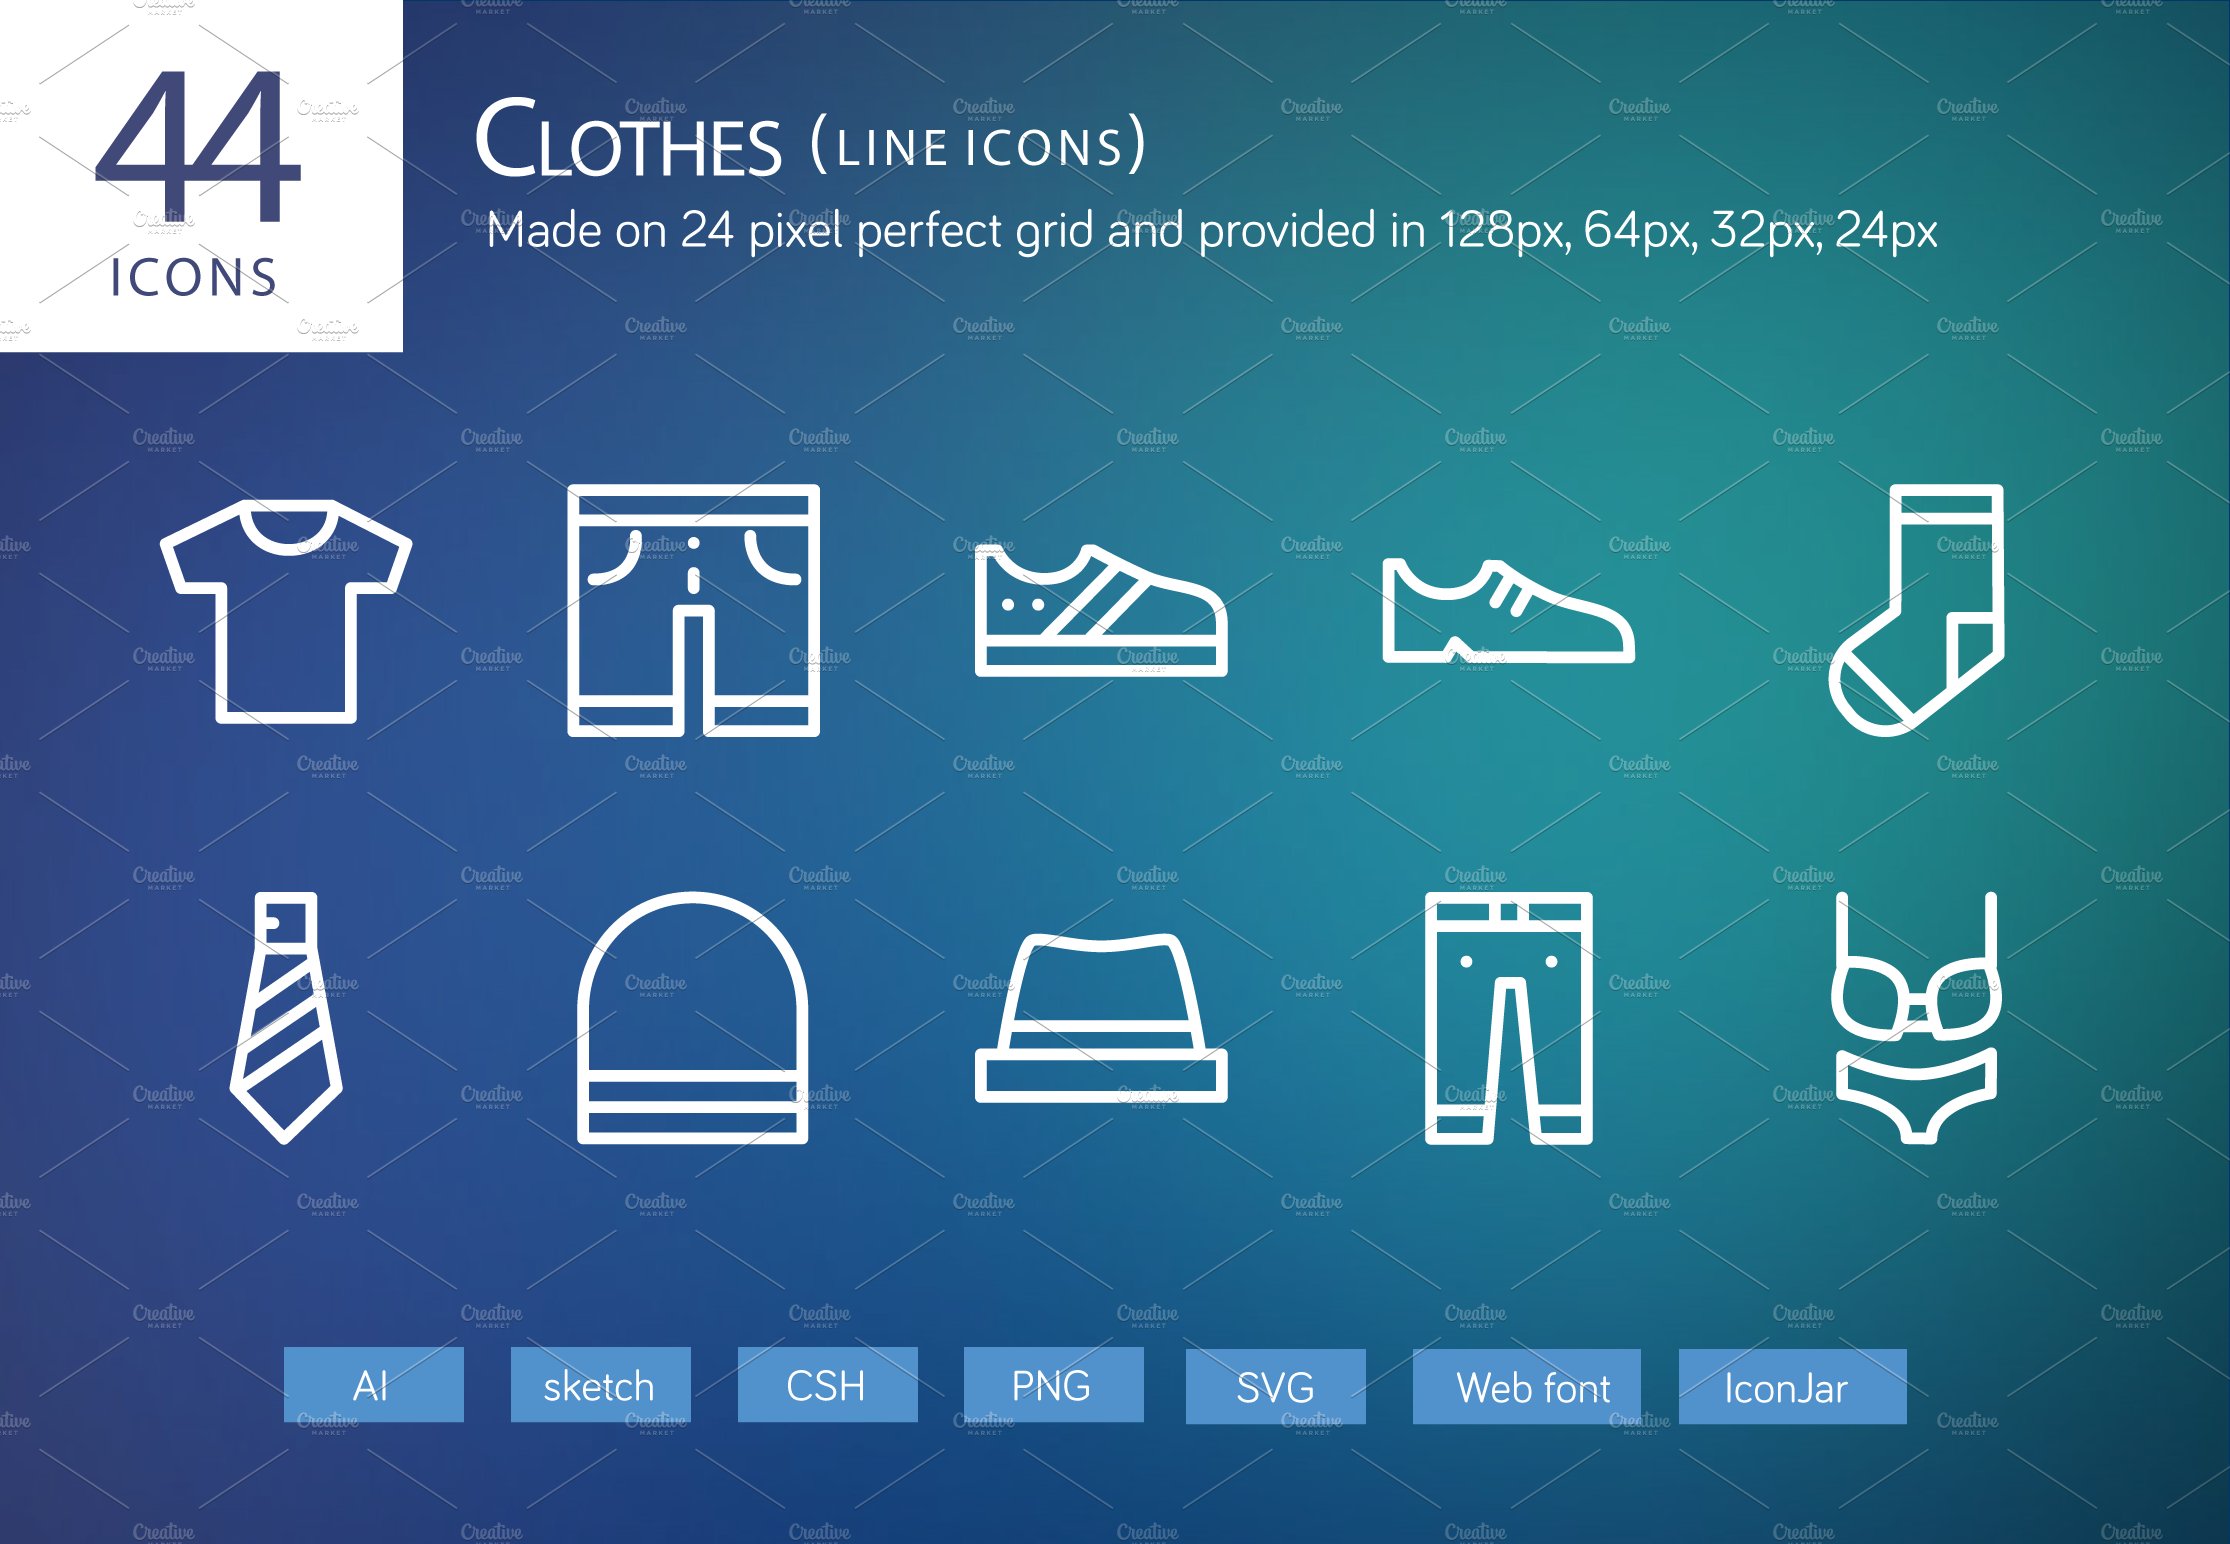 44 Clothes Line Icons cover image.